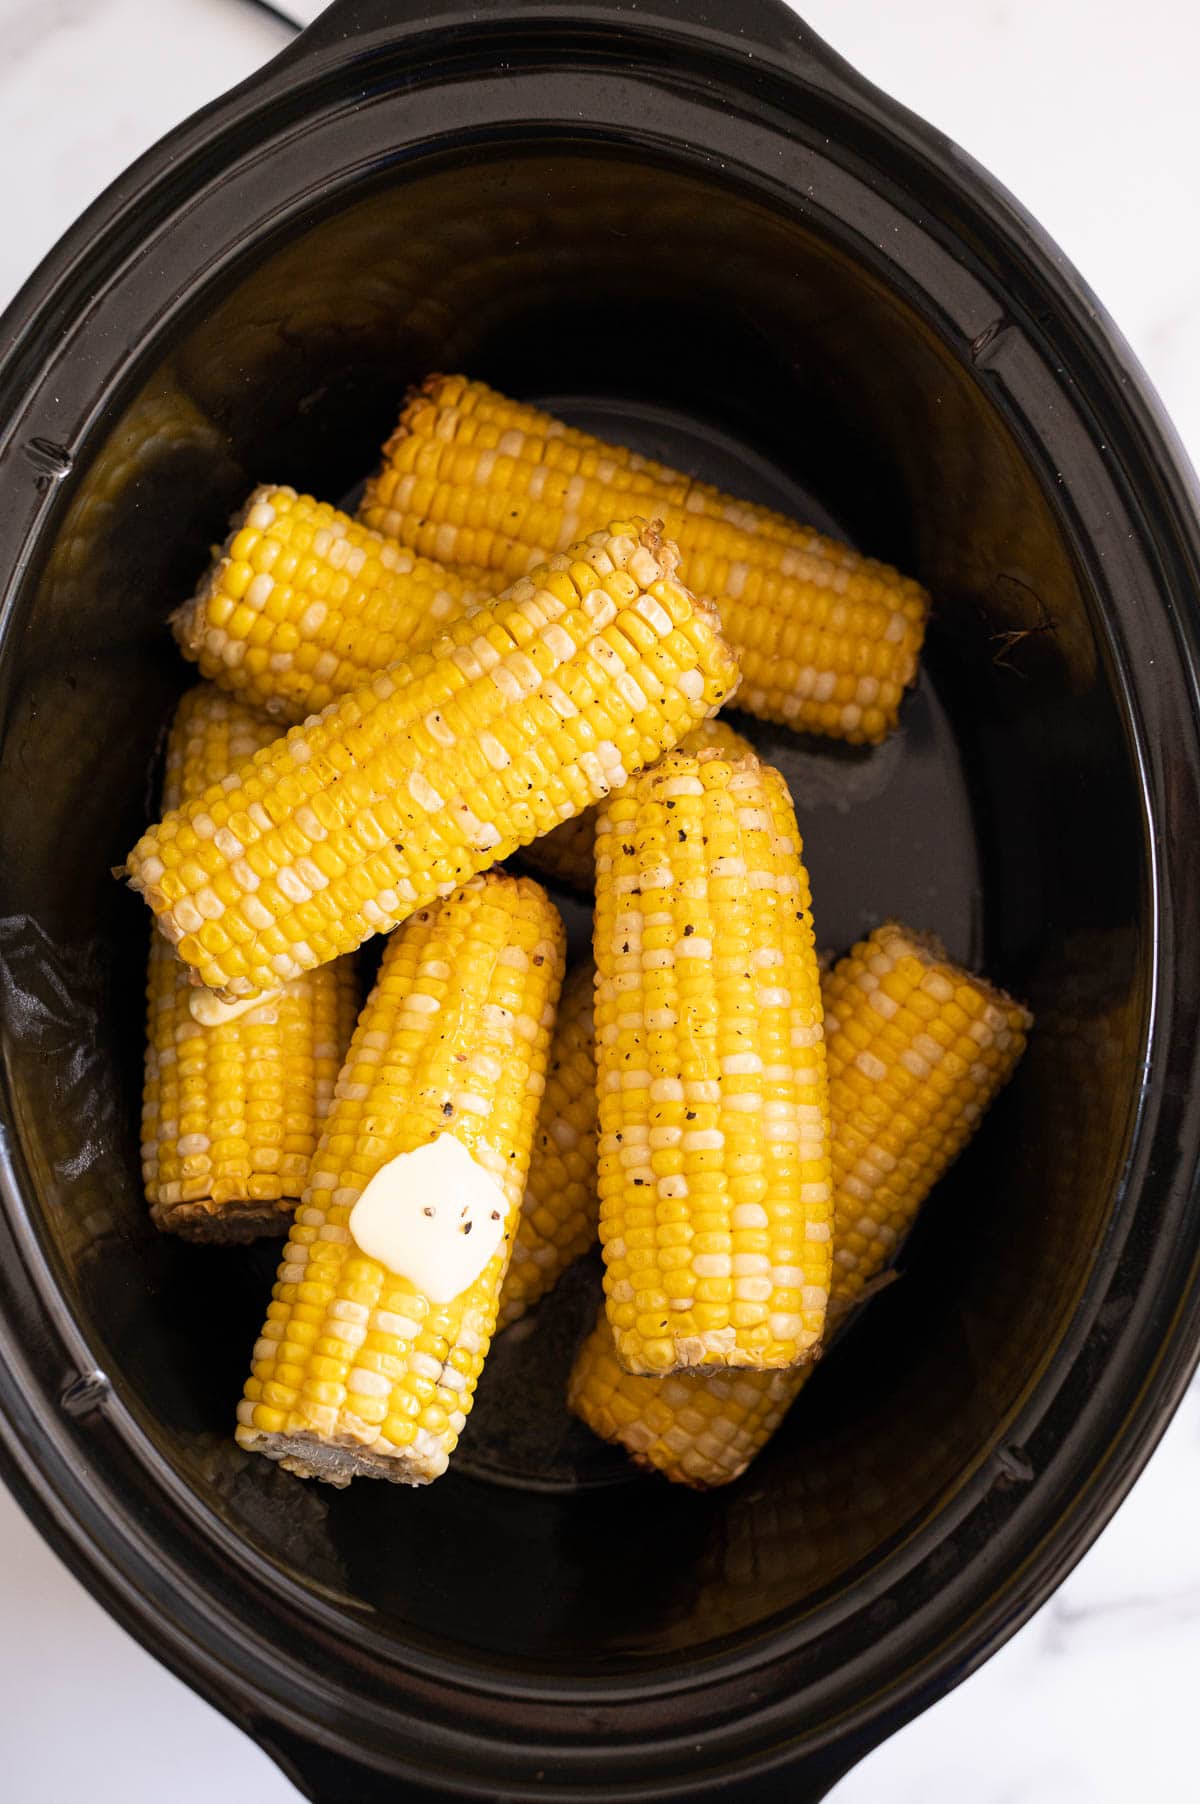 Crock pot corn on the cob smeared with butter and sprinkled with ground black pepper in a slow cooker insert.